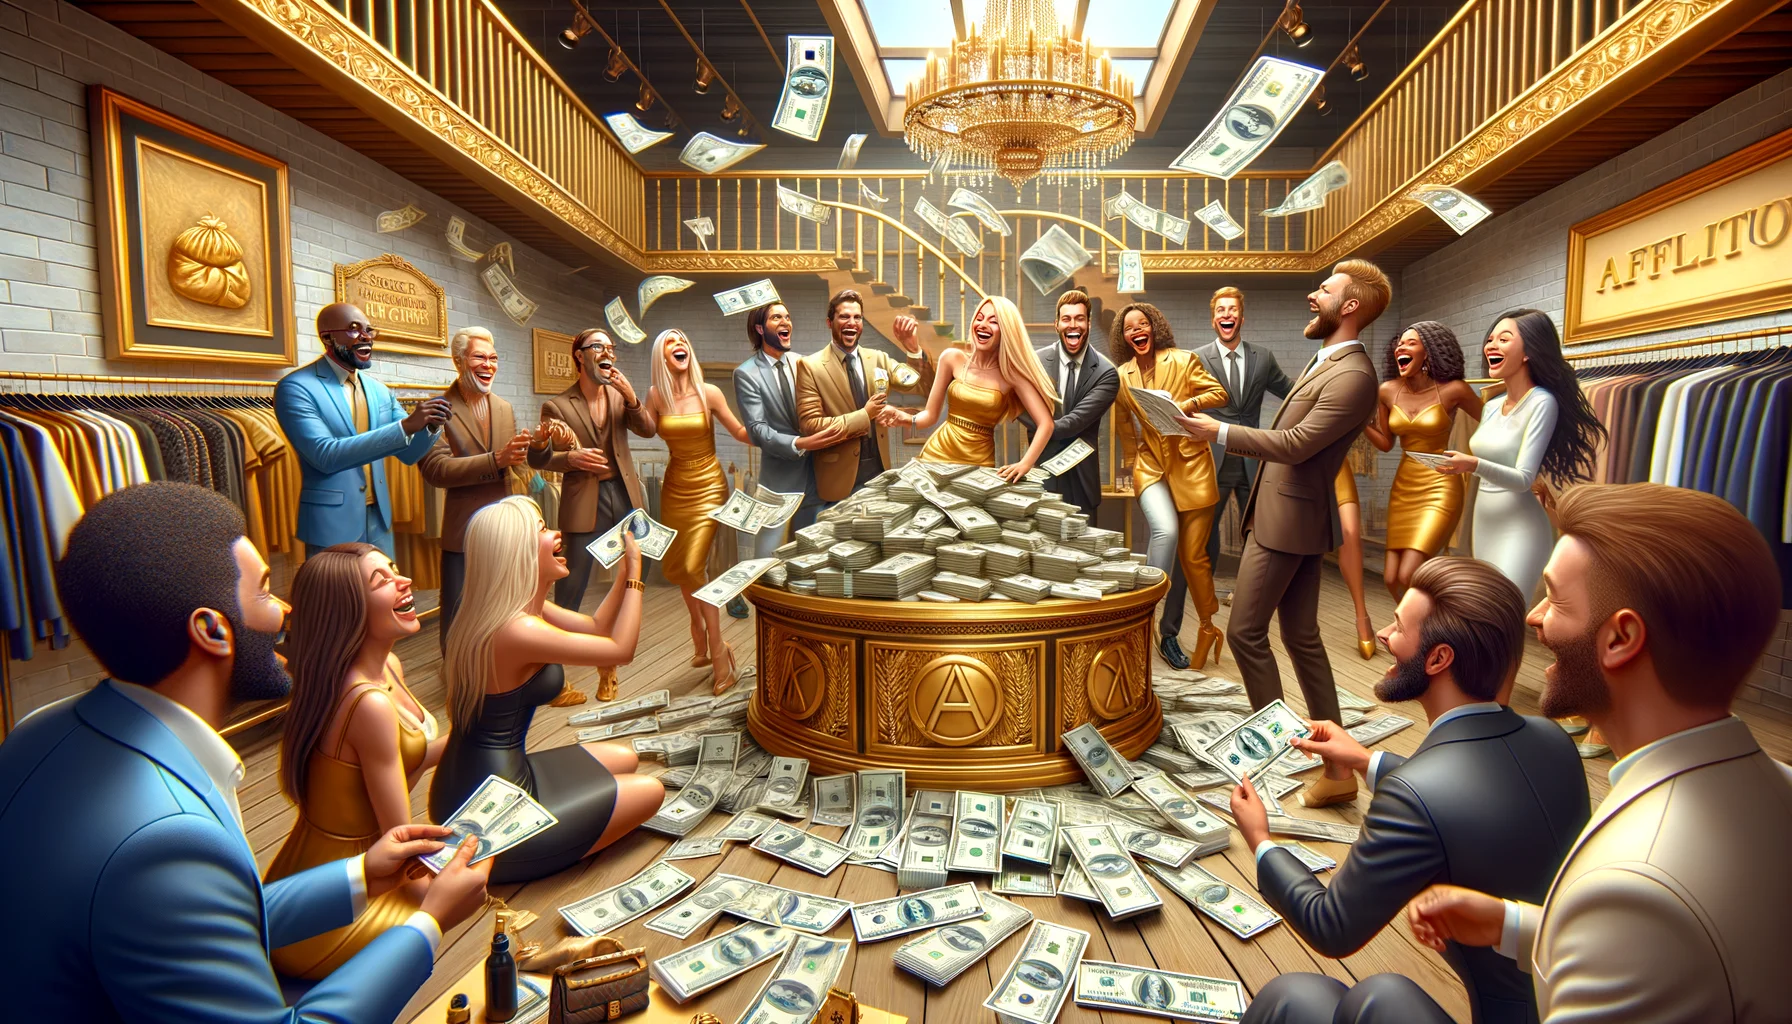 Create an amusing and lifelike scenario depicting an affiliate program for a generic high-end fashion brand, infused with humor. Imagine a chic boutique environment decked out in gold and leather, from where well-dressed salespeople of various descents and genders are trying to sell the program. Comically large commission checks are scattered about, and a few customers, both men and women of different ethnic backgrounds such as Caucasian, Hispanic, and Black, are laughing while collecting the checks with exaggerated enthusiasm.